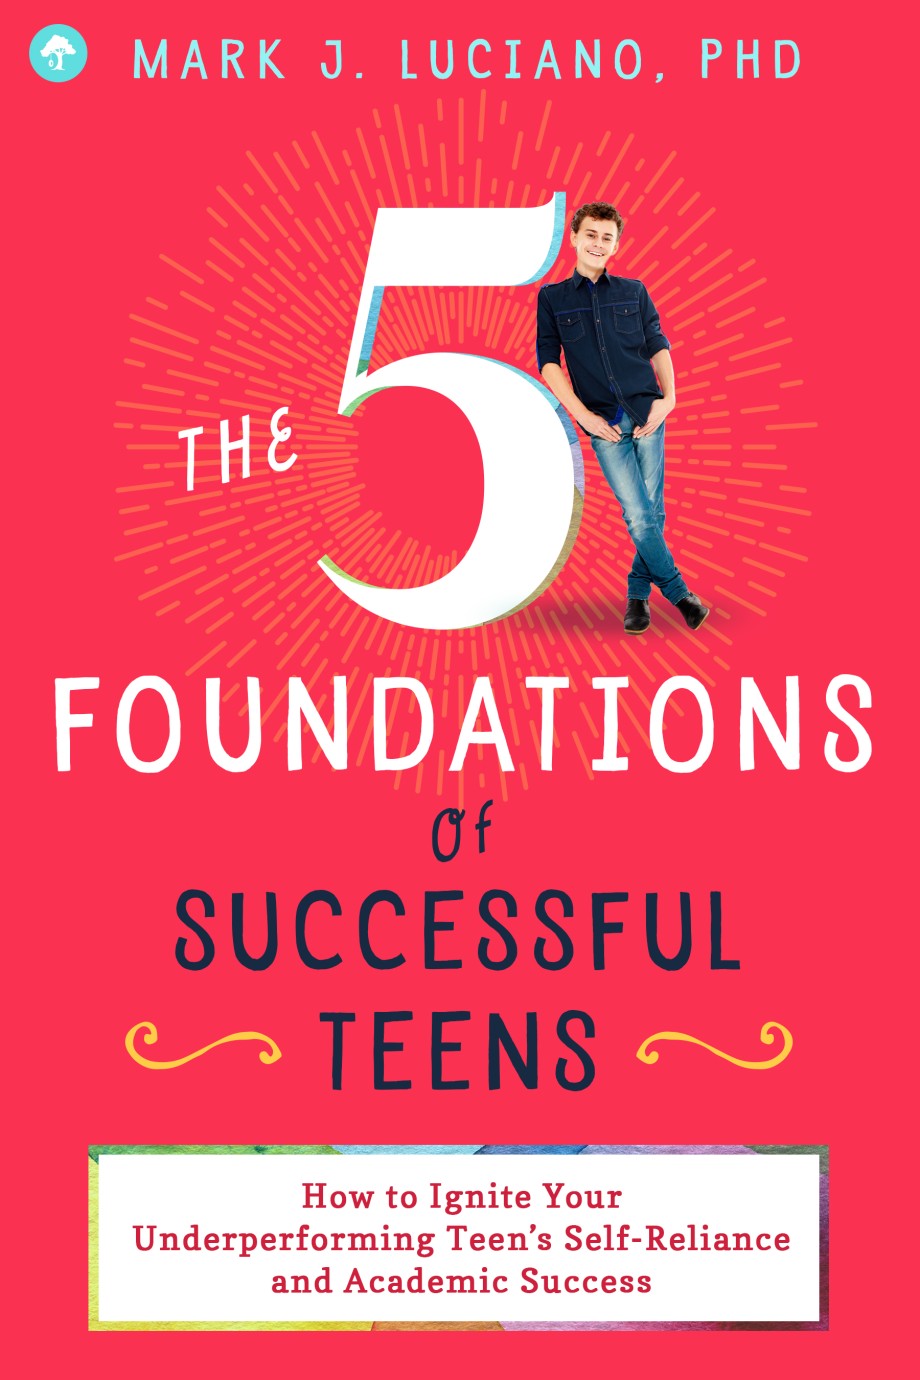 5 Foundations of Successful Teens How to Ignite Your Underperforming Teen's Self-Reliance and Academic Success